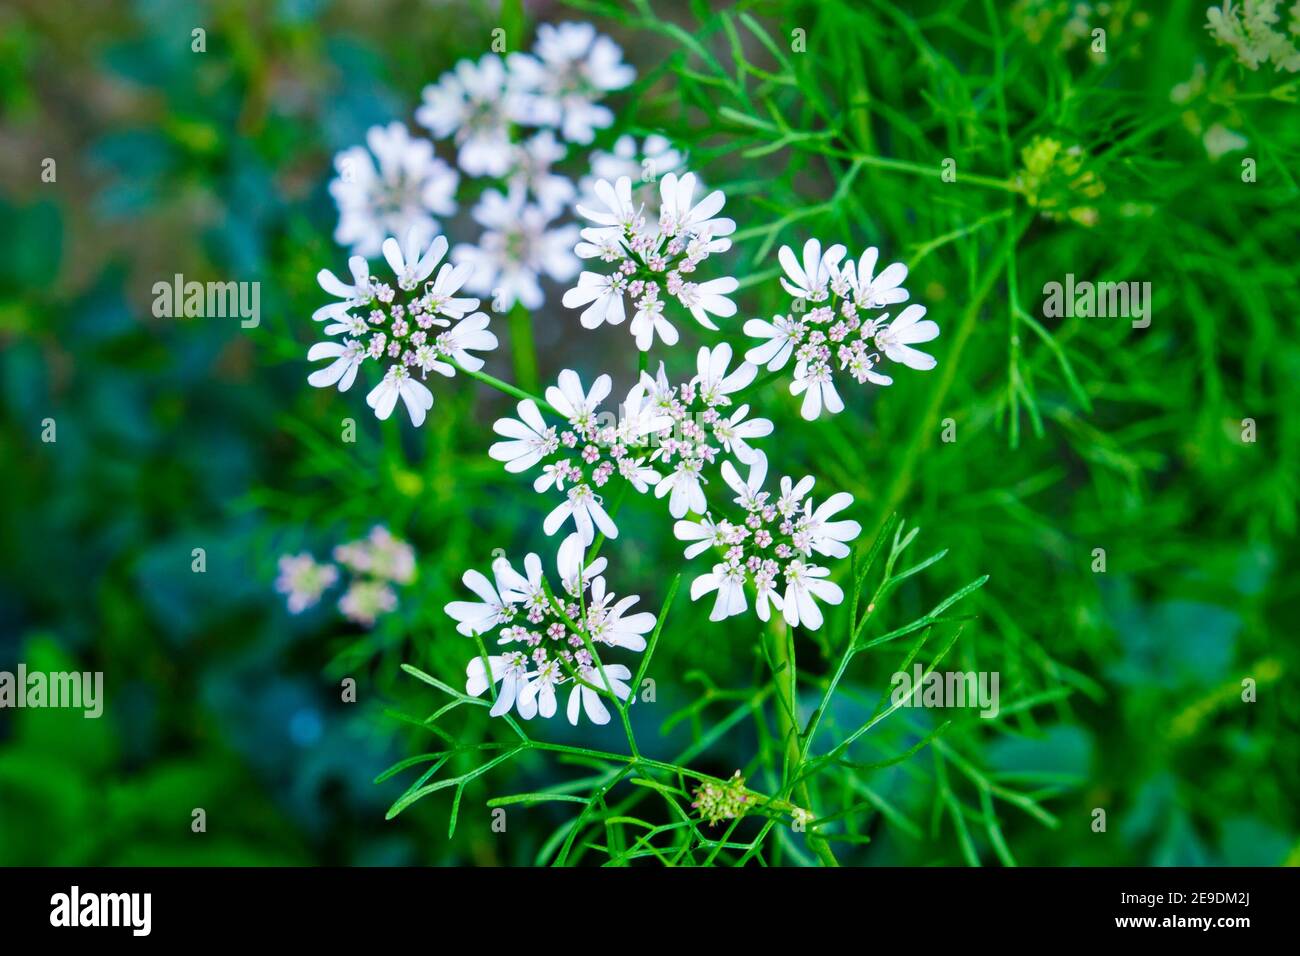 Cilantro flowers are blooming on the plant and that will produce coriander seeds. Stock Photo